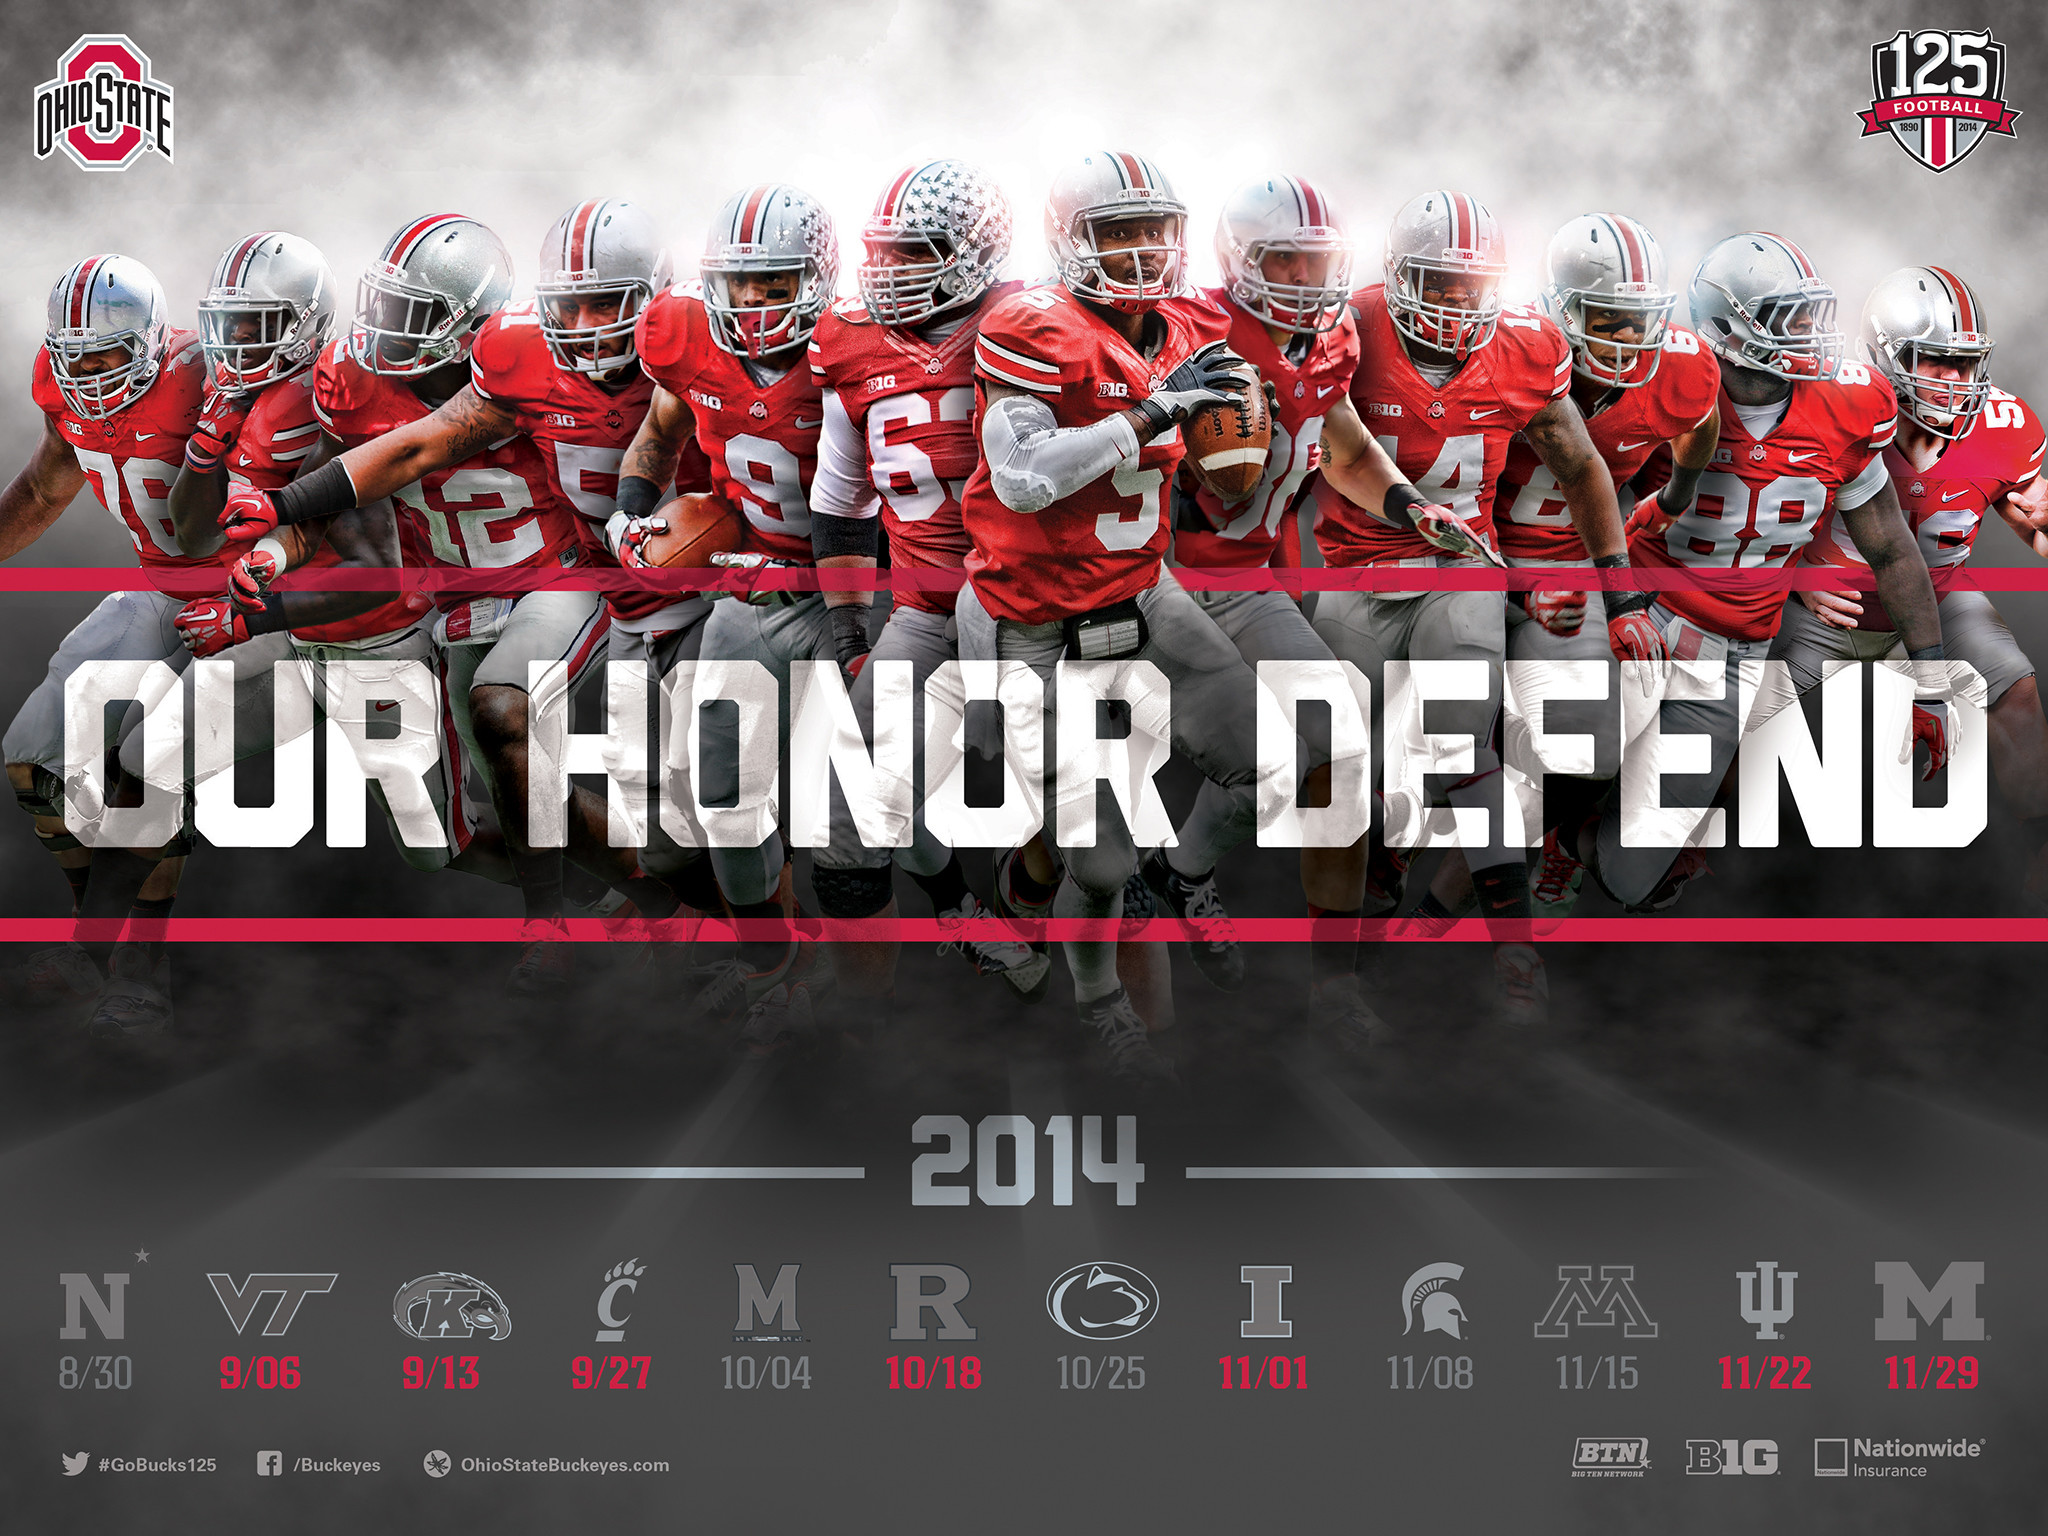 2048x1536 Download The Ohio State Football 2014 Schedule Poster for Printing and  Desktop Wallpaper